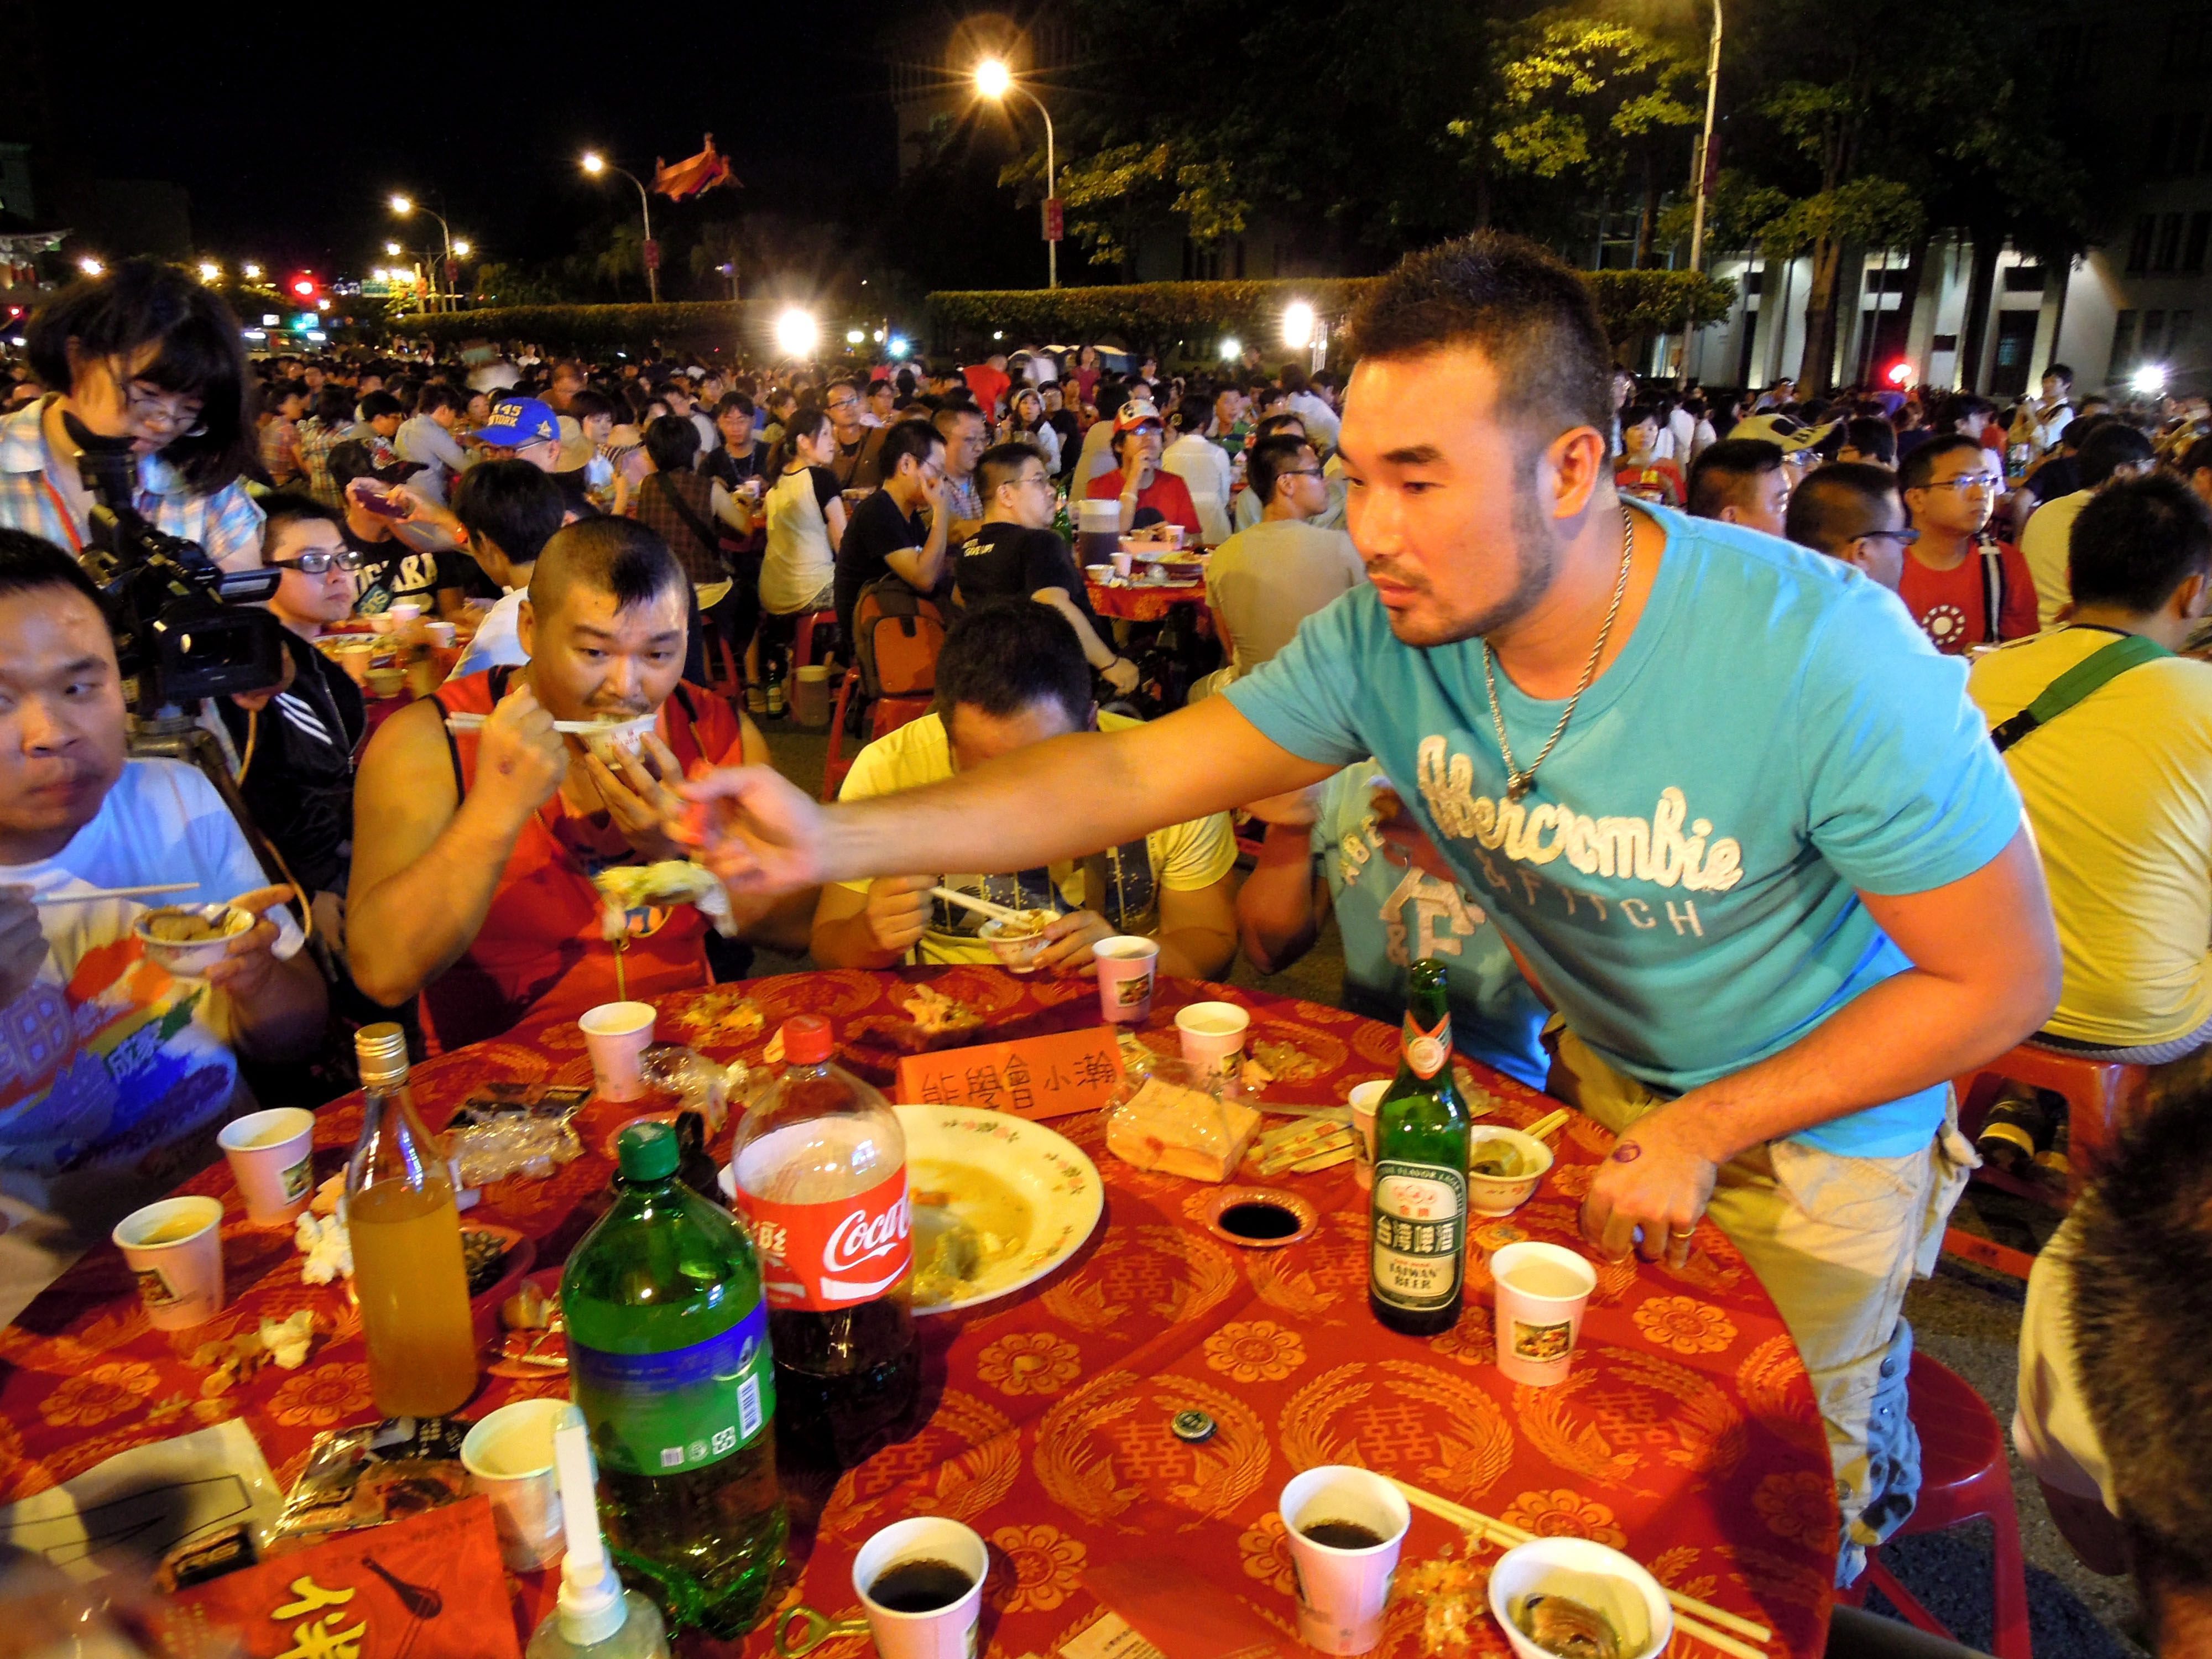 Taiwan homosexuals and supporters attend a 120-table wedding banquet in front of the Presidential Office in Taipei, Taiwan, on September 7, 2013.  Photo EPA